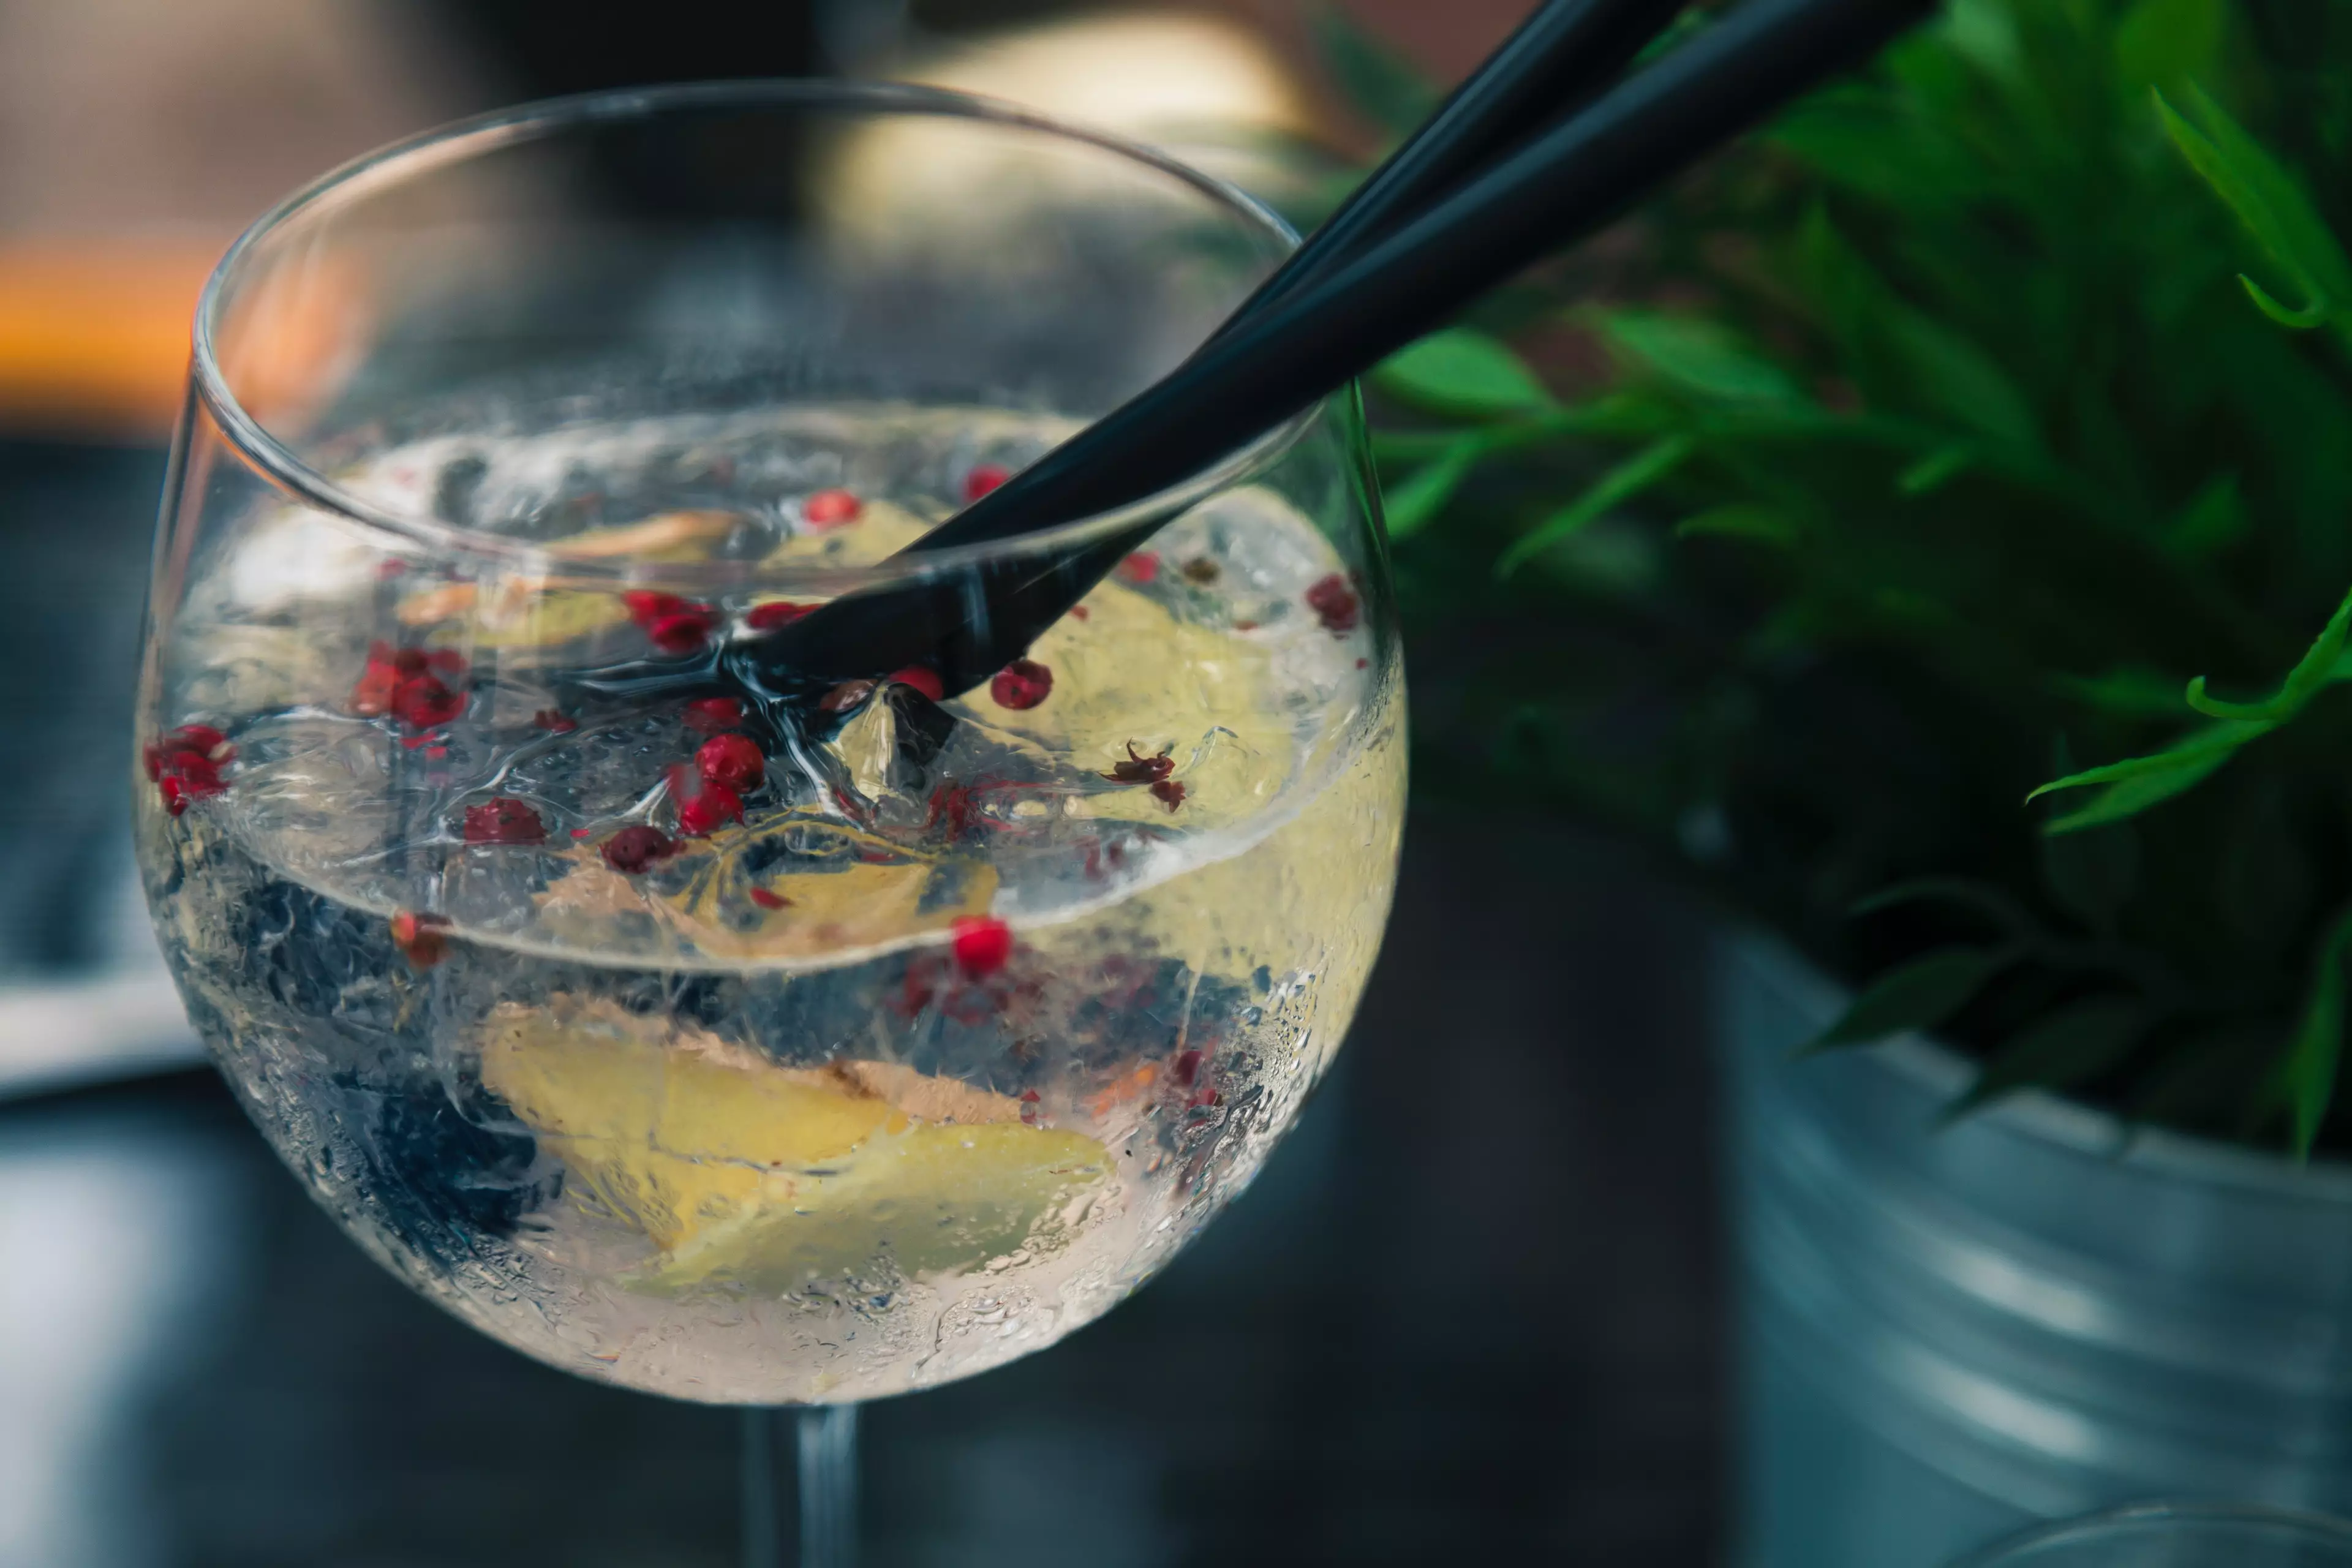 Wetherspoon is selling loads of brands of gin from the UK and overseas (